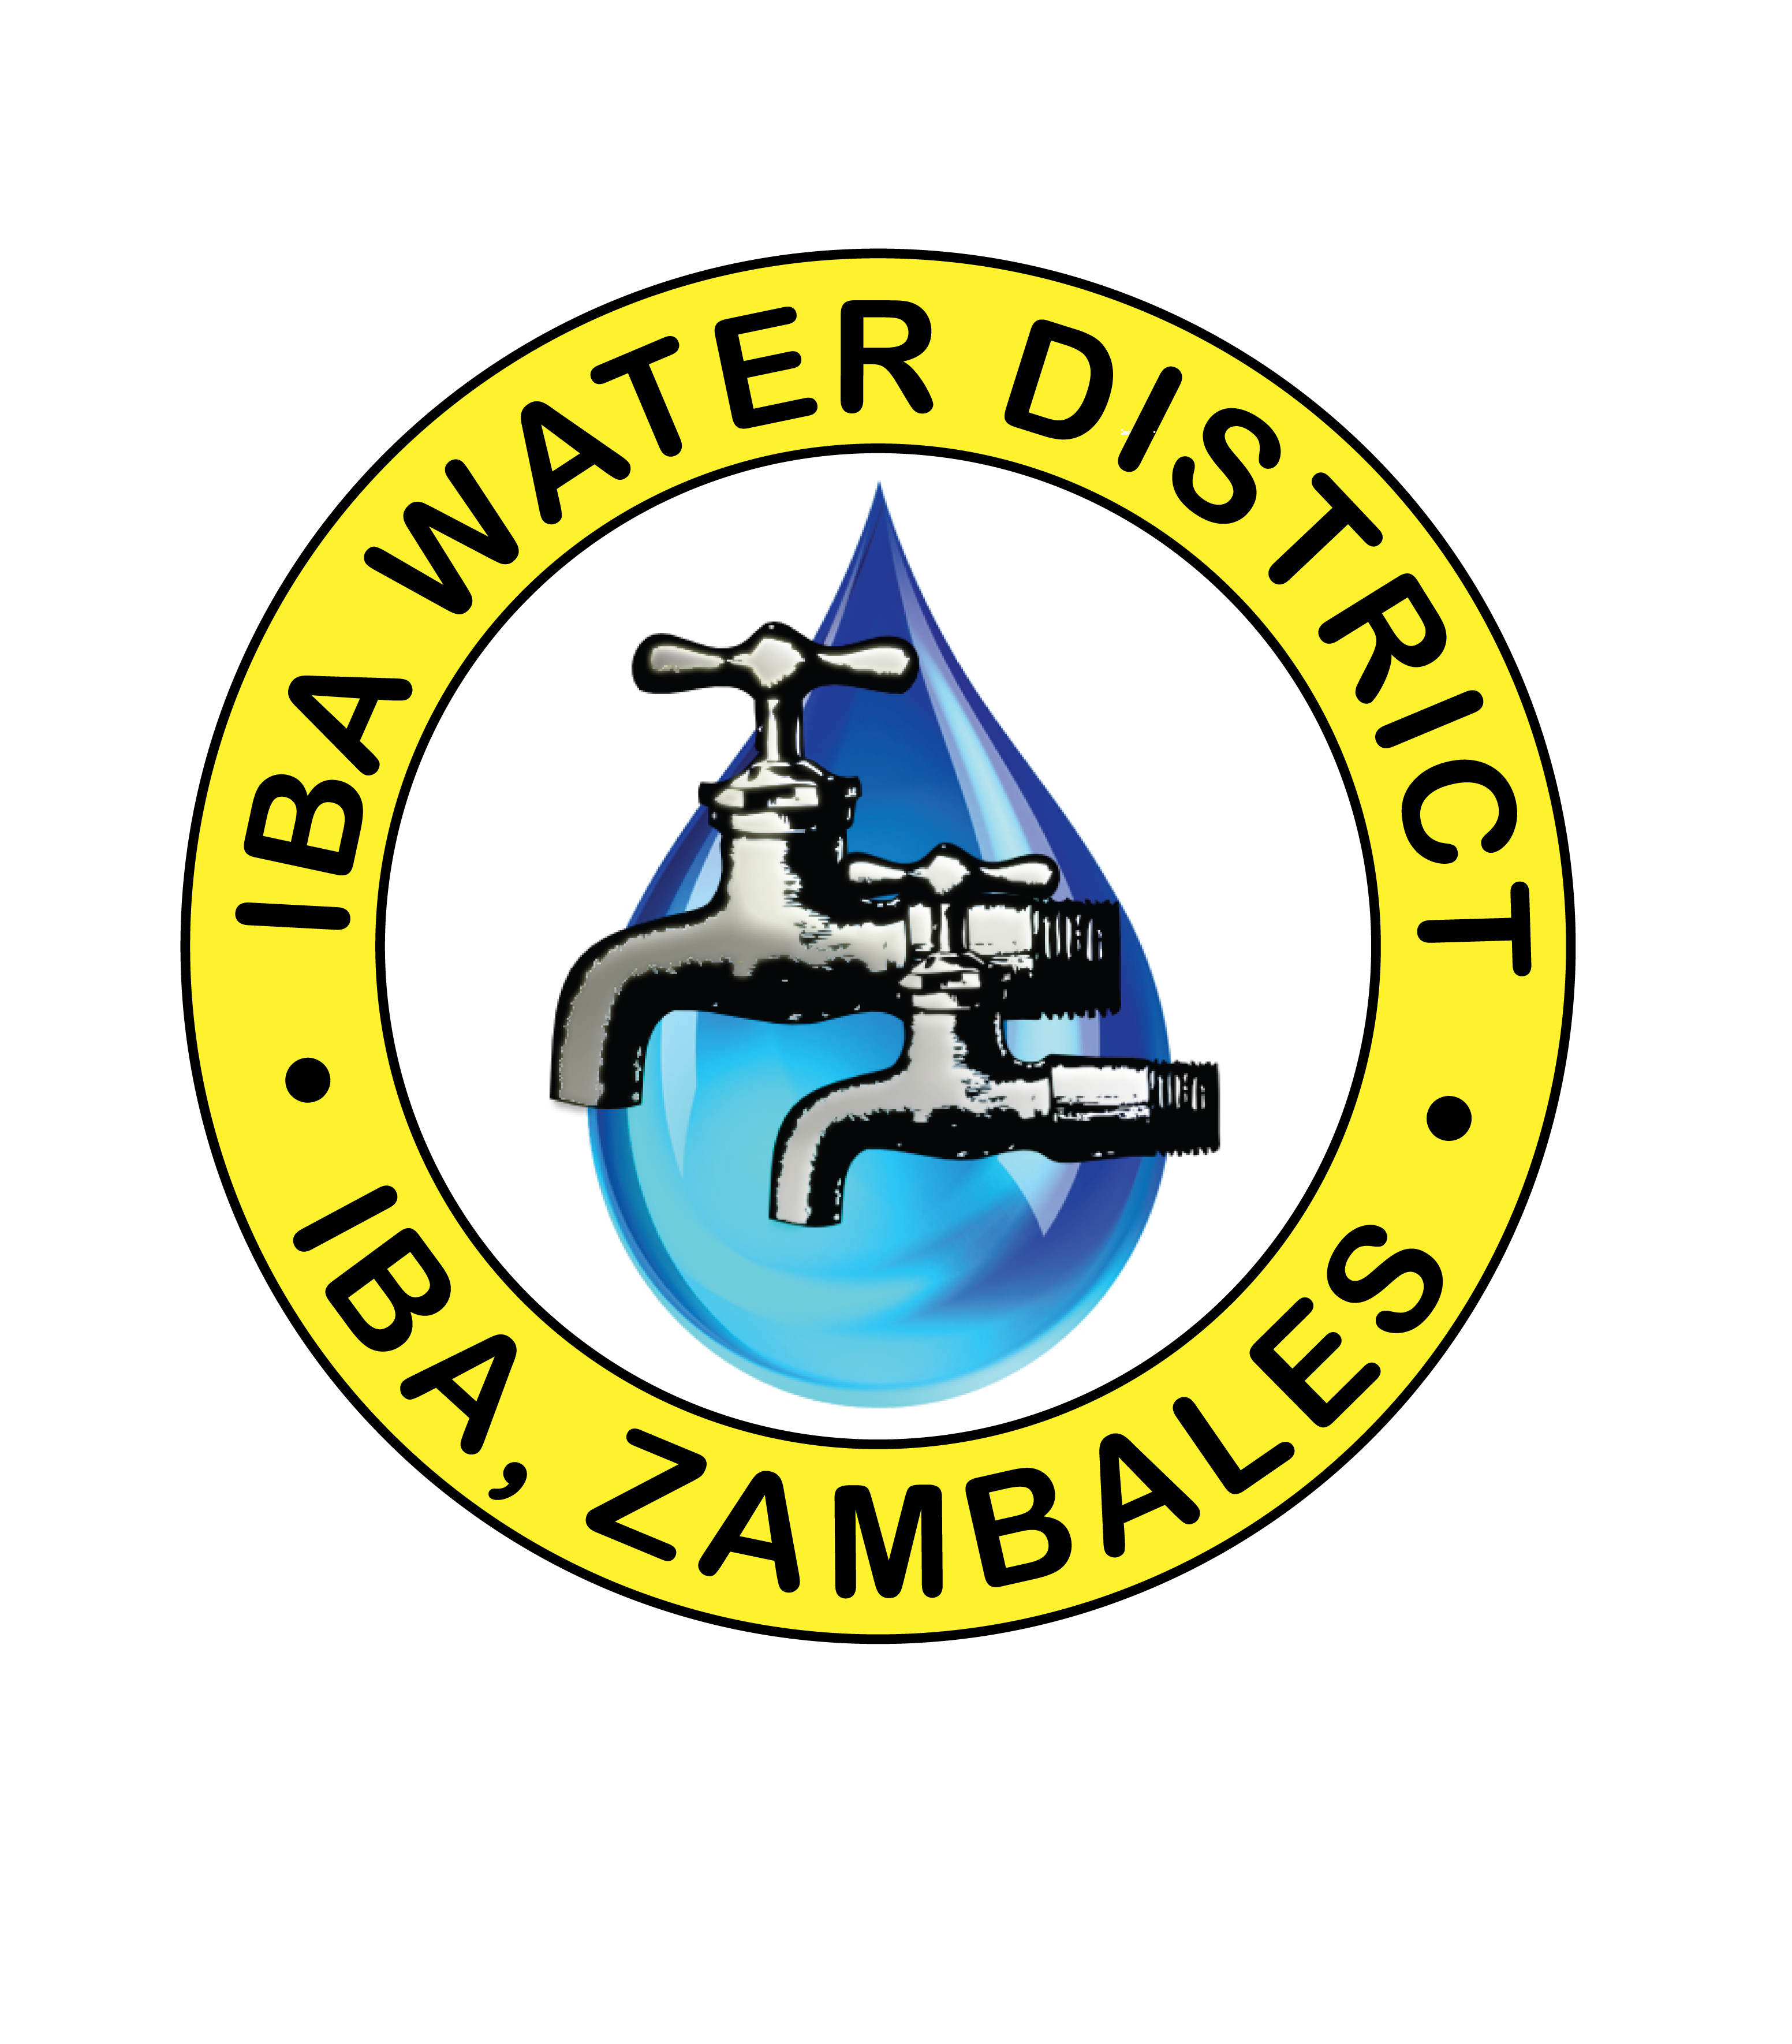 IBA WATER DISTRICT